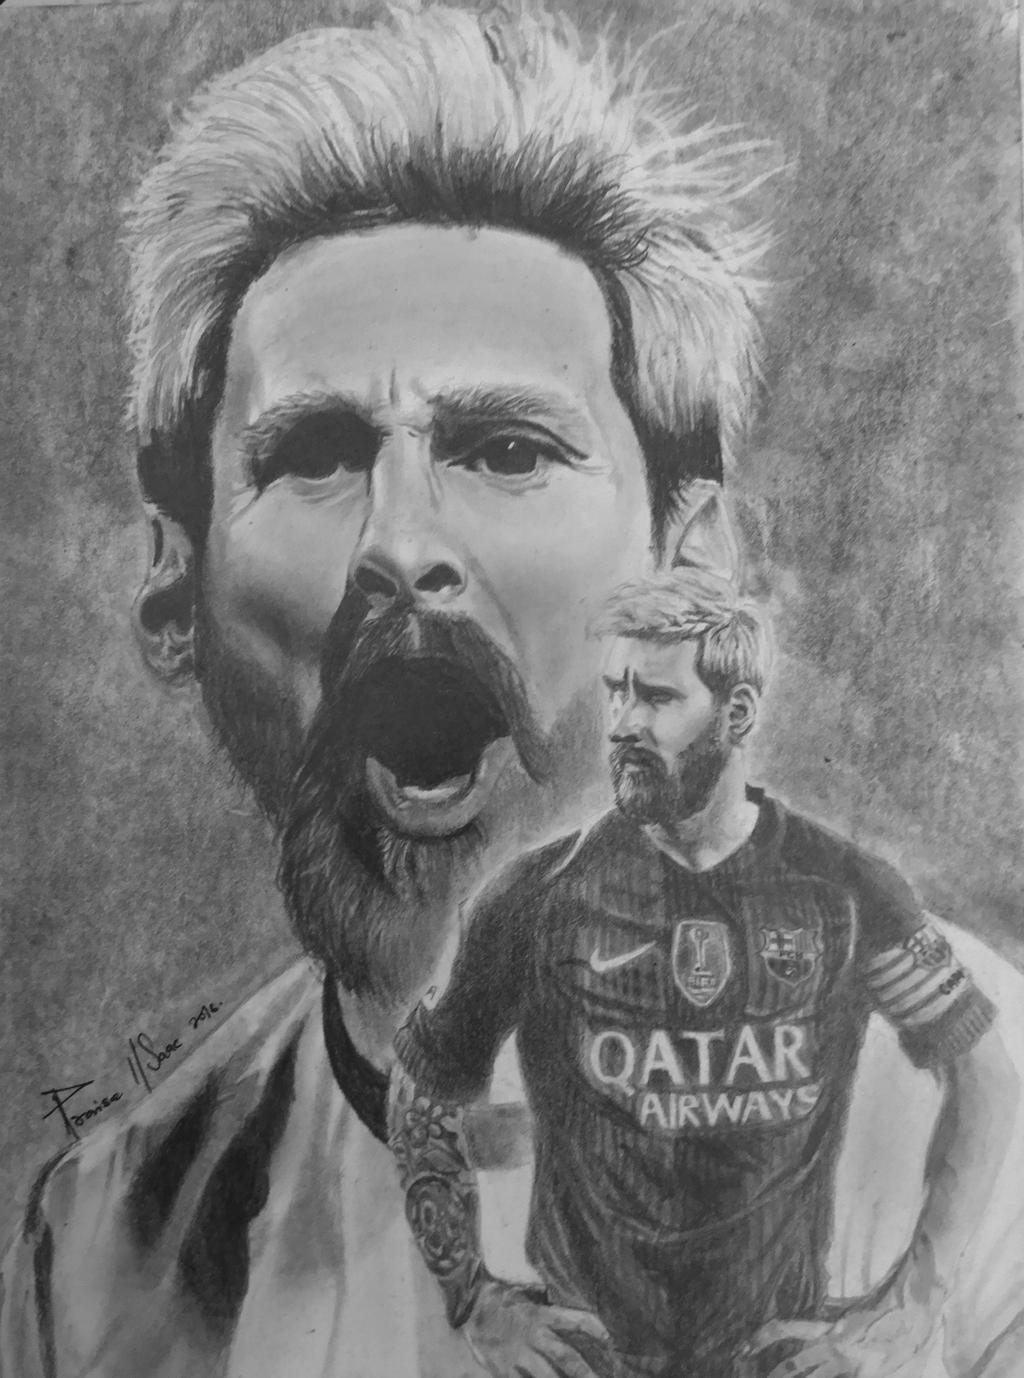 Graphite drawing of Lionel Messi by praiseisaac on DeviantArt